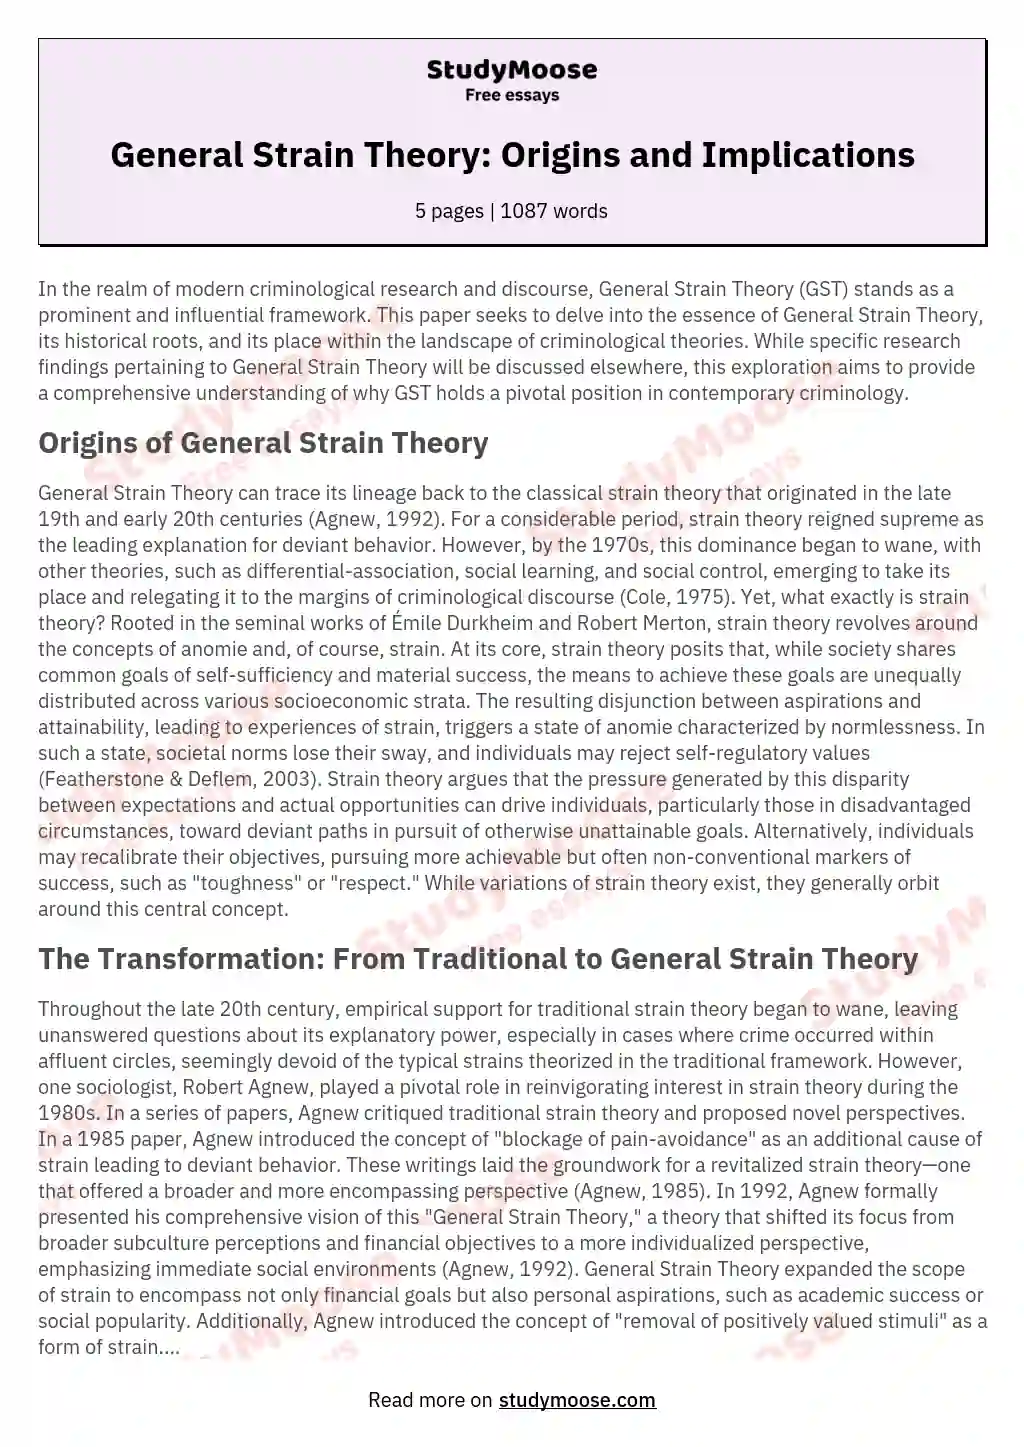 General Strain Theory: Origins and Implications essay